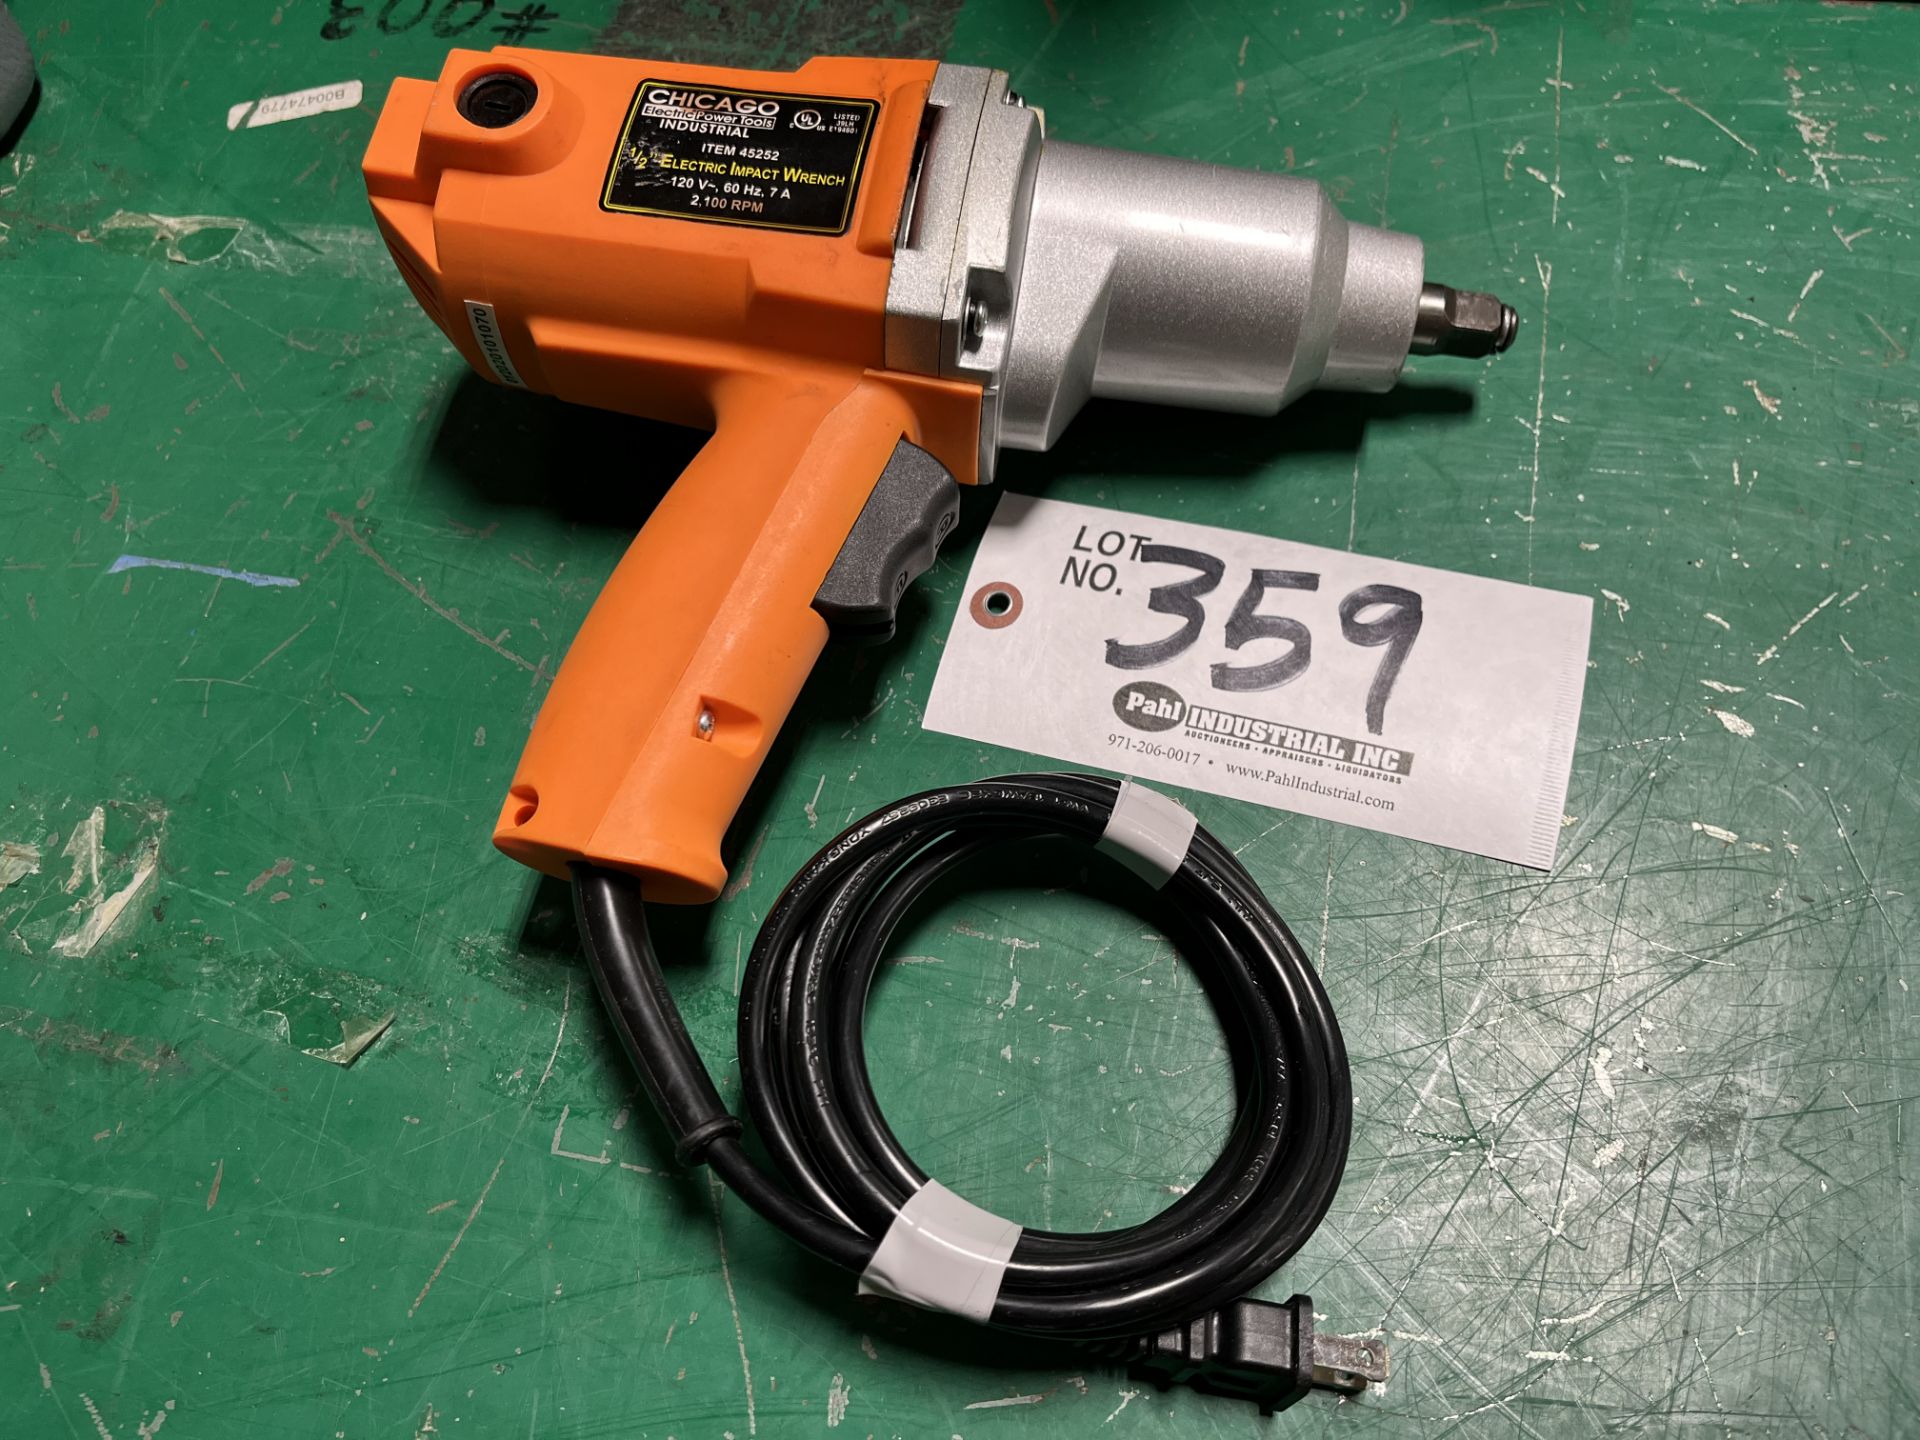 Chicago 1/2" Impact Wrench